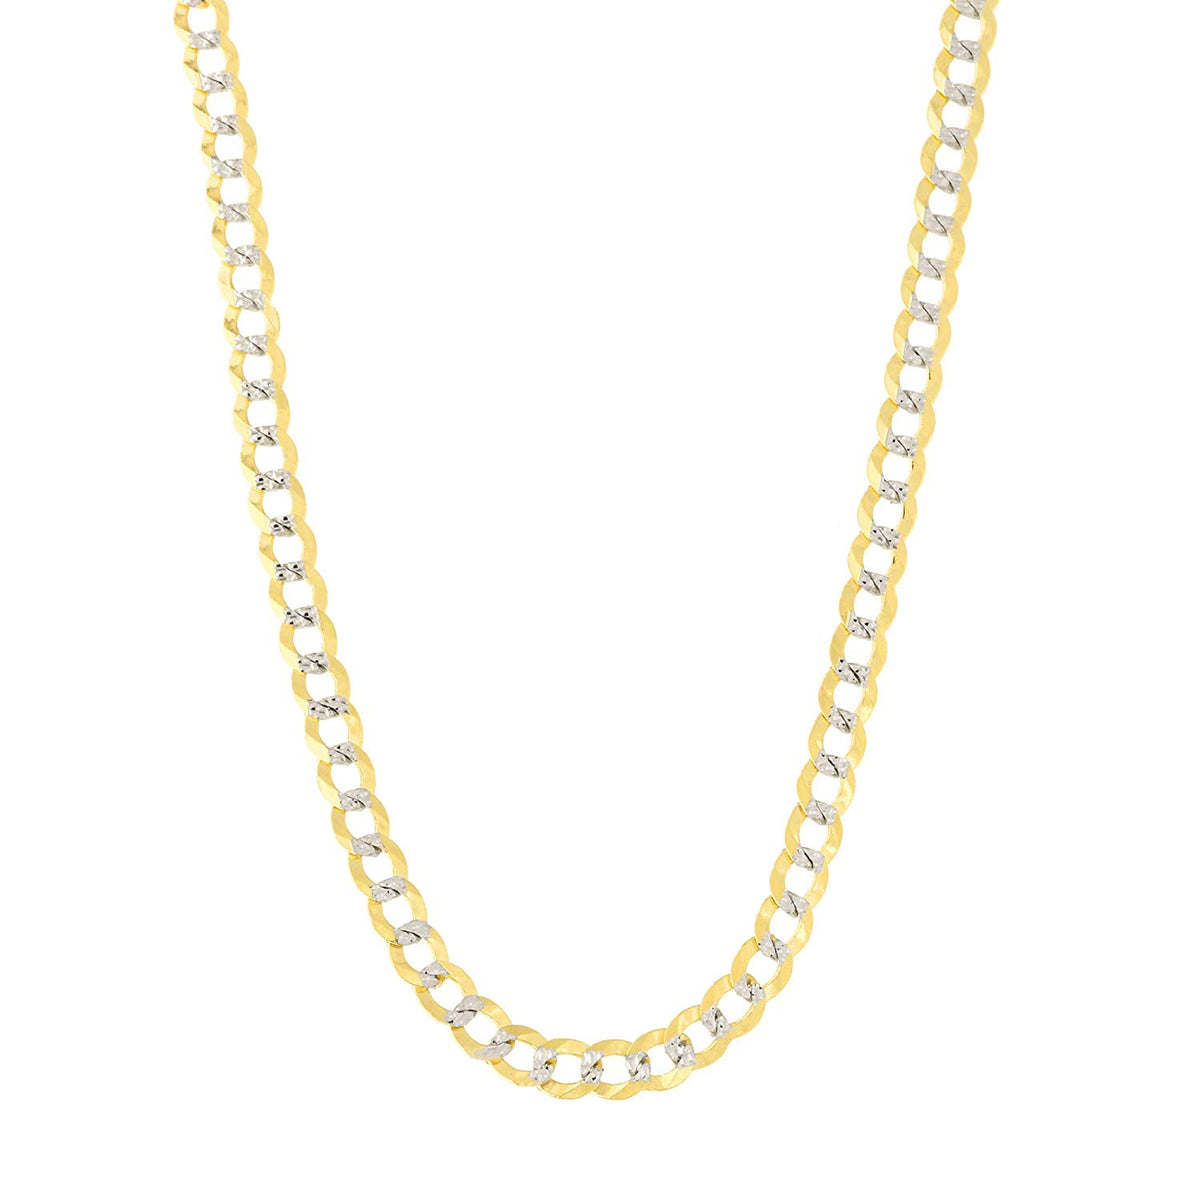 14k 2 Tone Yellow And White Gold Curb Chain Necklace, 3.6mm